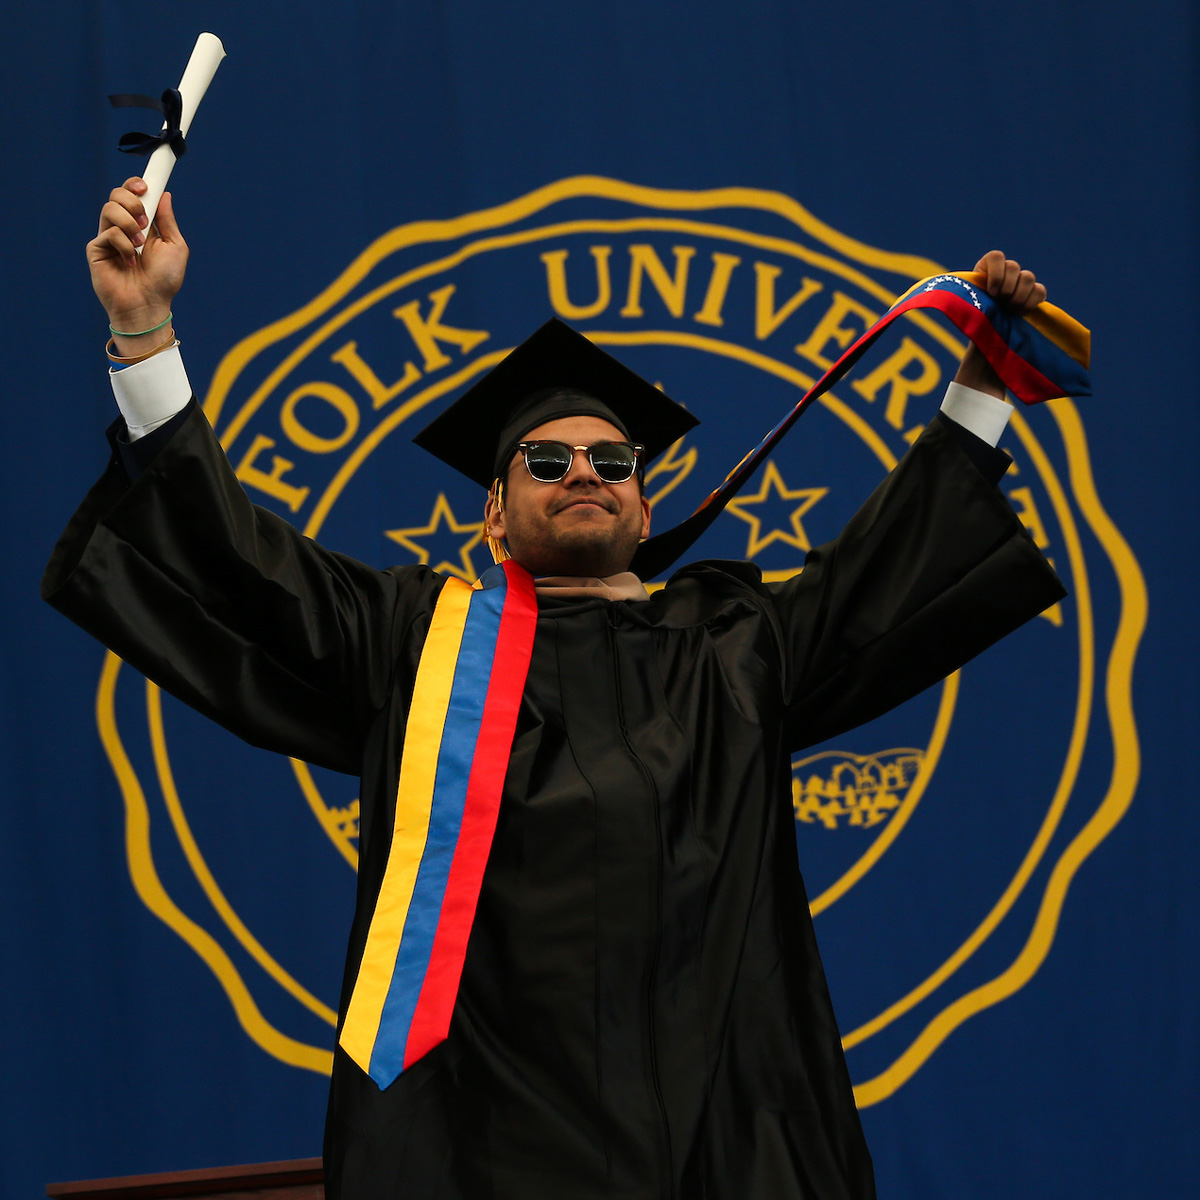 Omar Hernandez proudly displaying his scroll and Venezuelan flag on stage during Commencement.